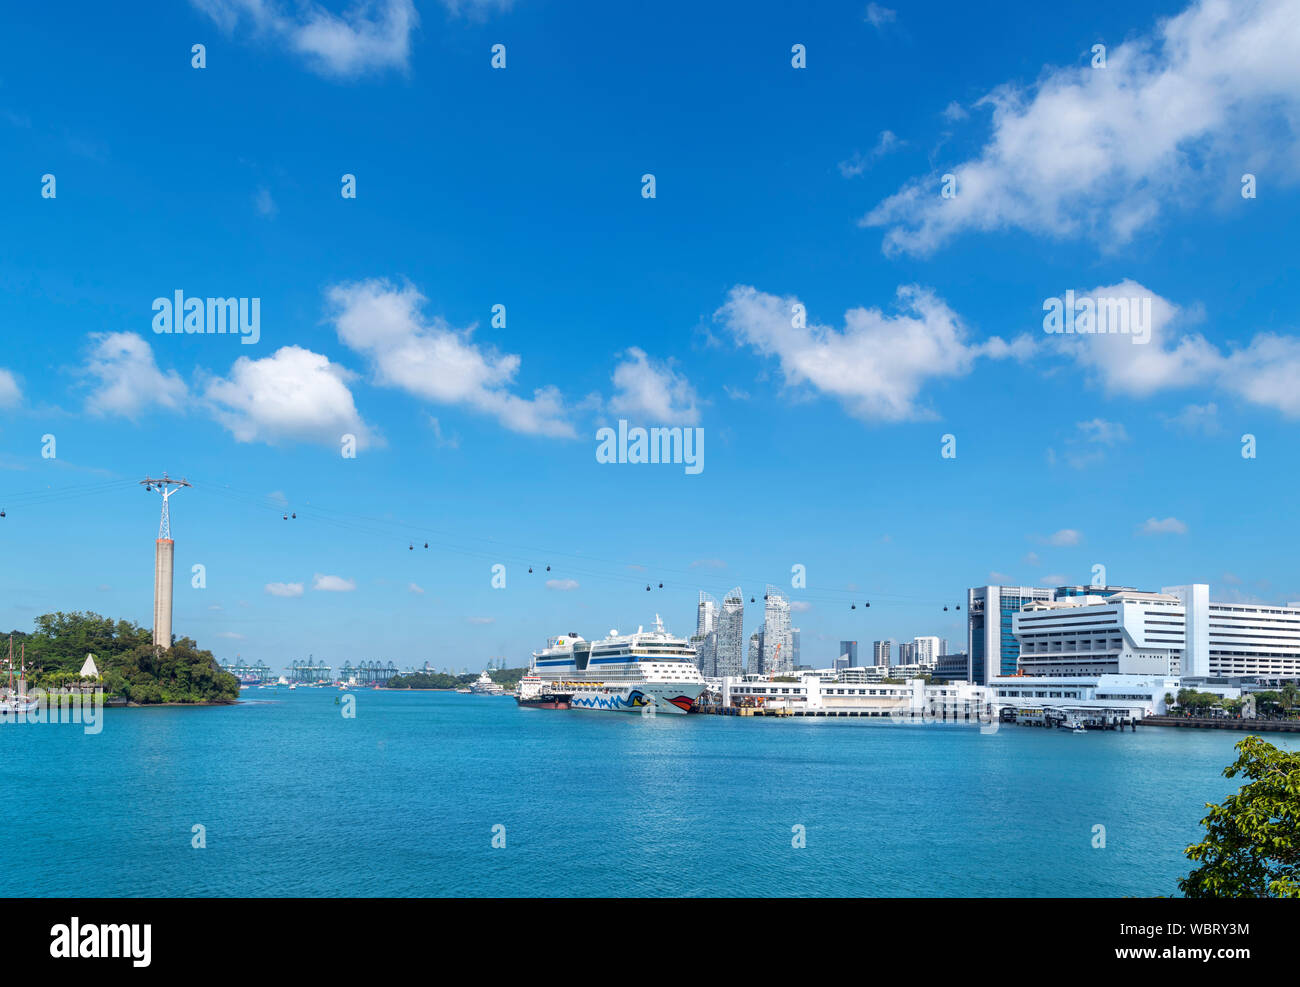 Cruise ship in the harbour at Singapore with the Sentosa Island Cable Car above, Harbourfront, Singapore City, Singapore Stock Photo